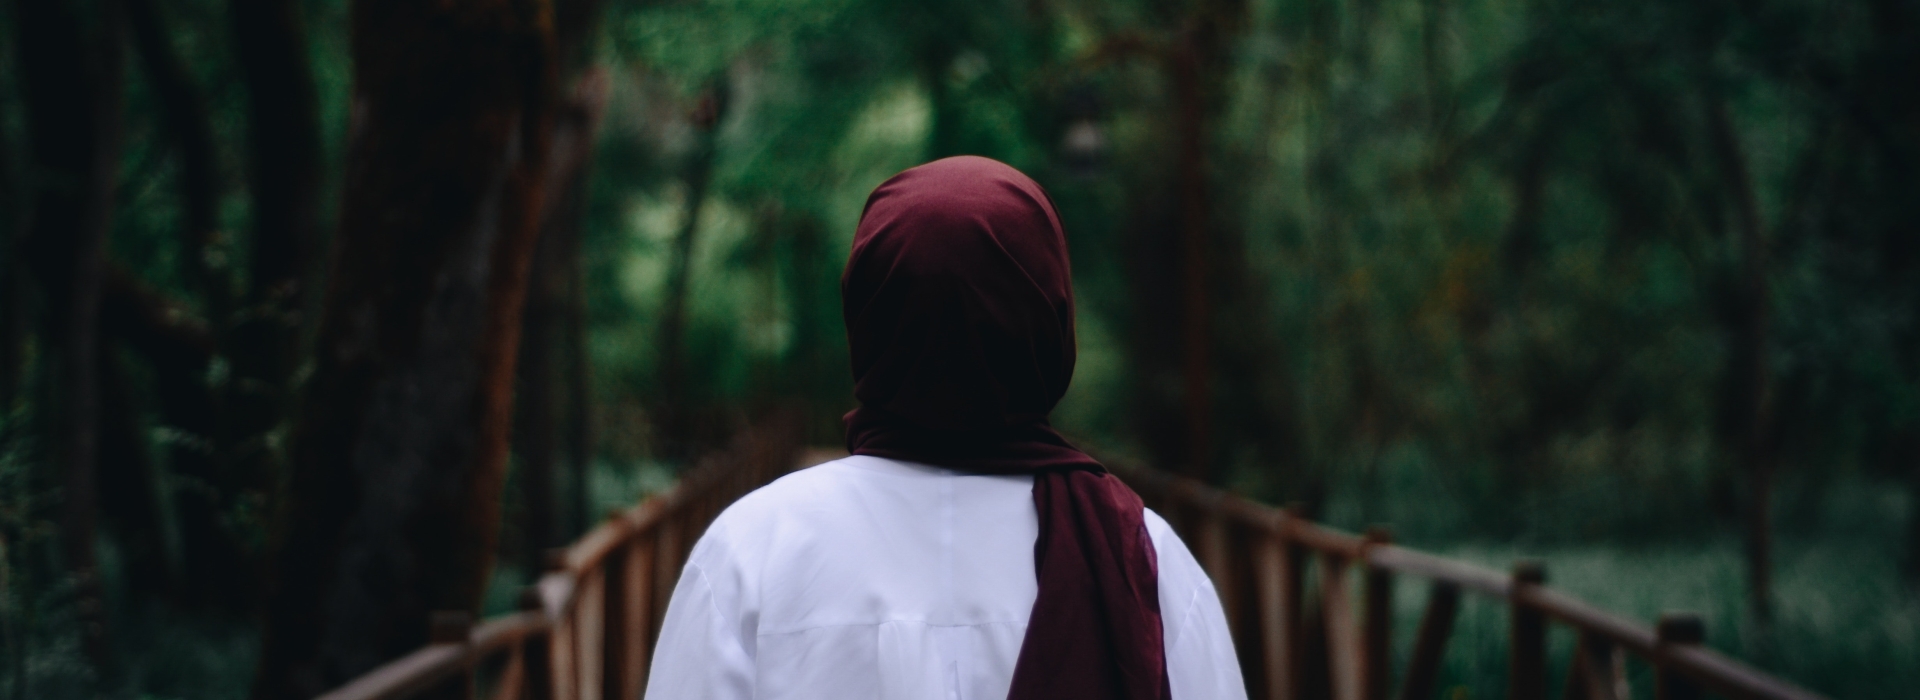 New Publication from QUEST: Framing Hijab in the European Mind Photo by Ekrulila from Pexels